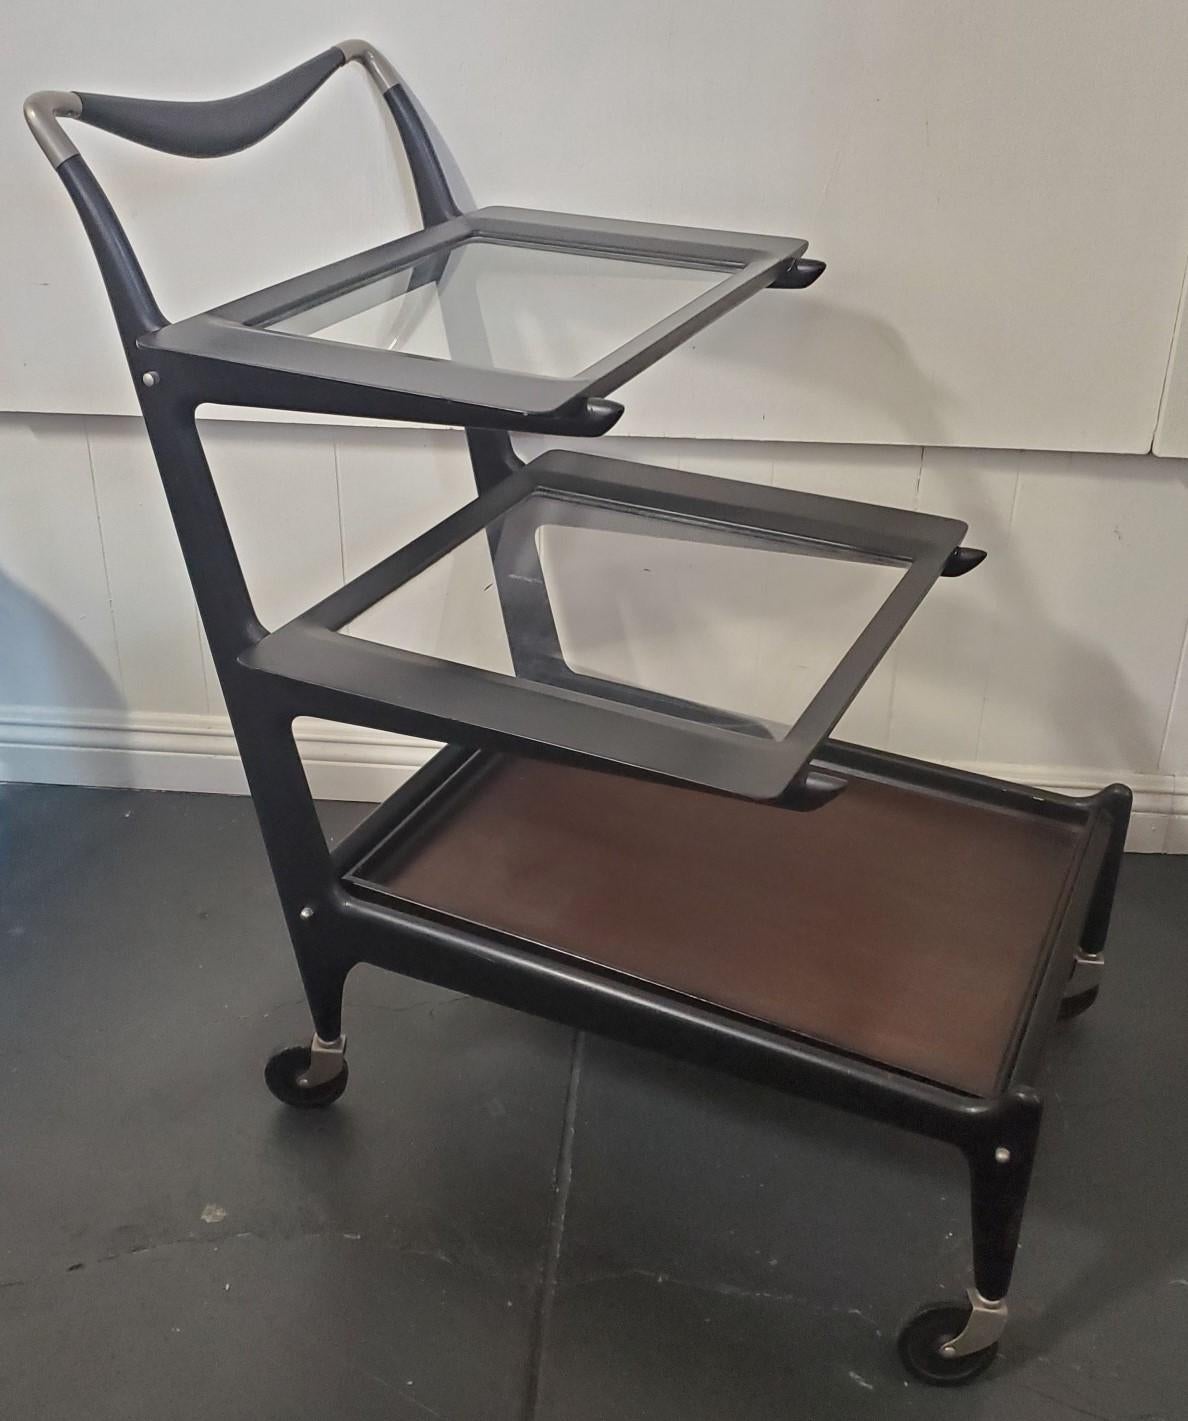 1950s Italian modern tea trolly bar cart by Cesare Lacca with removable shelving.